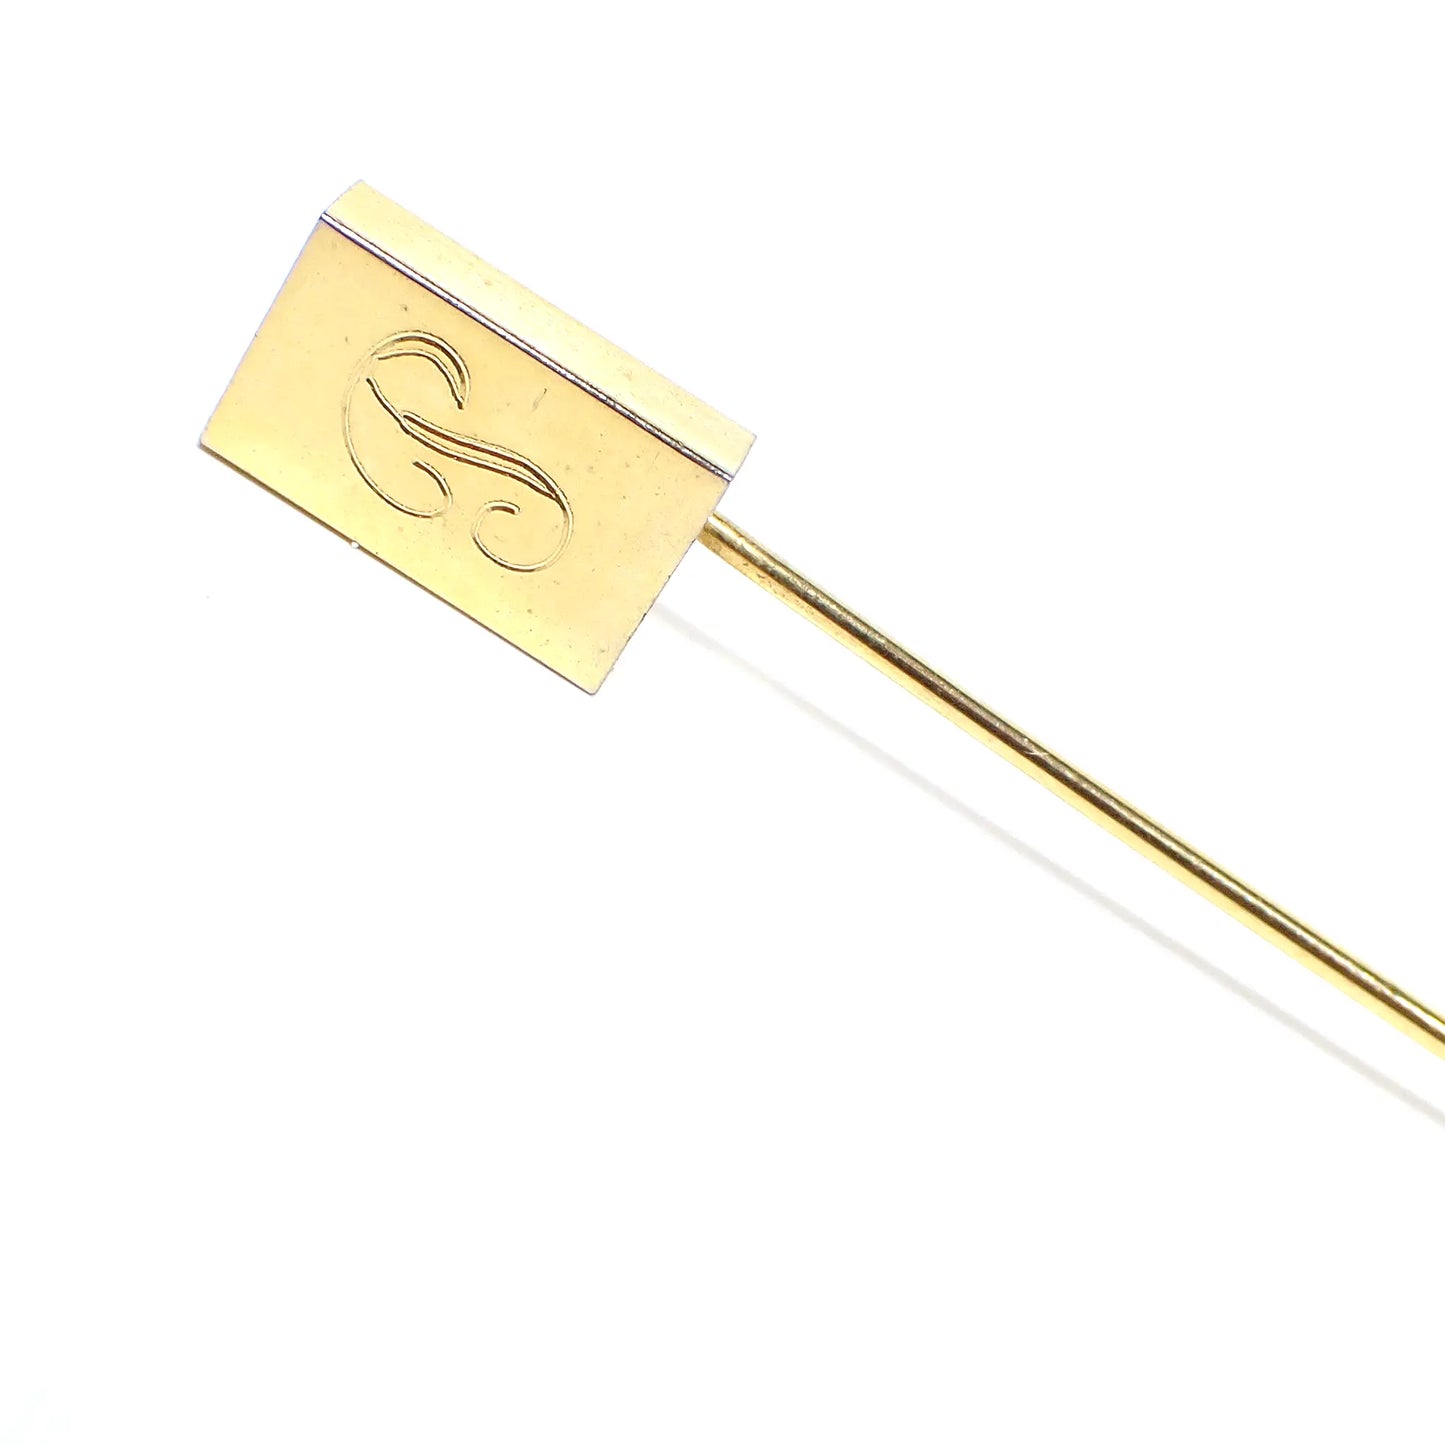 Enlarged view of the top part of the Mid Century vintage initial letter P stick pin. It is gold tone in color and has a rectangle on the top. There is a fancy script letter P engraved on the front.